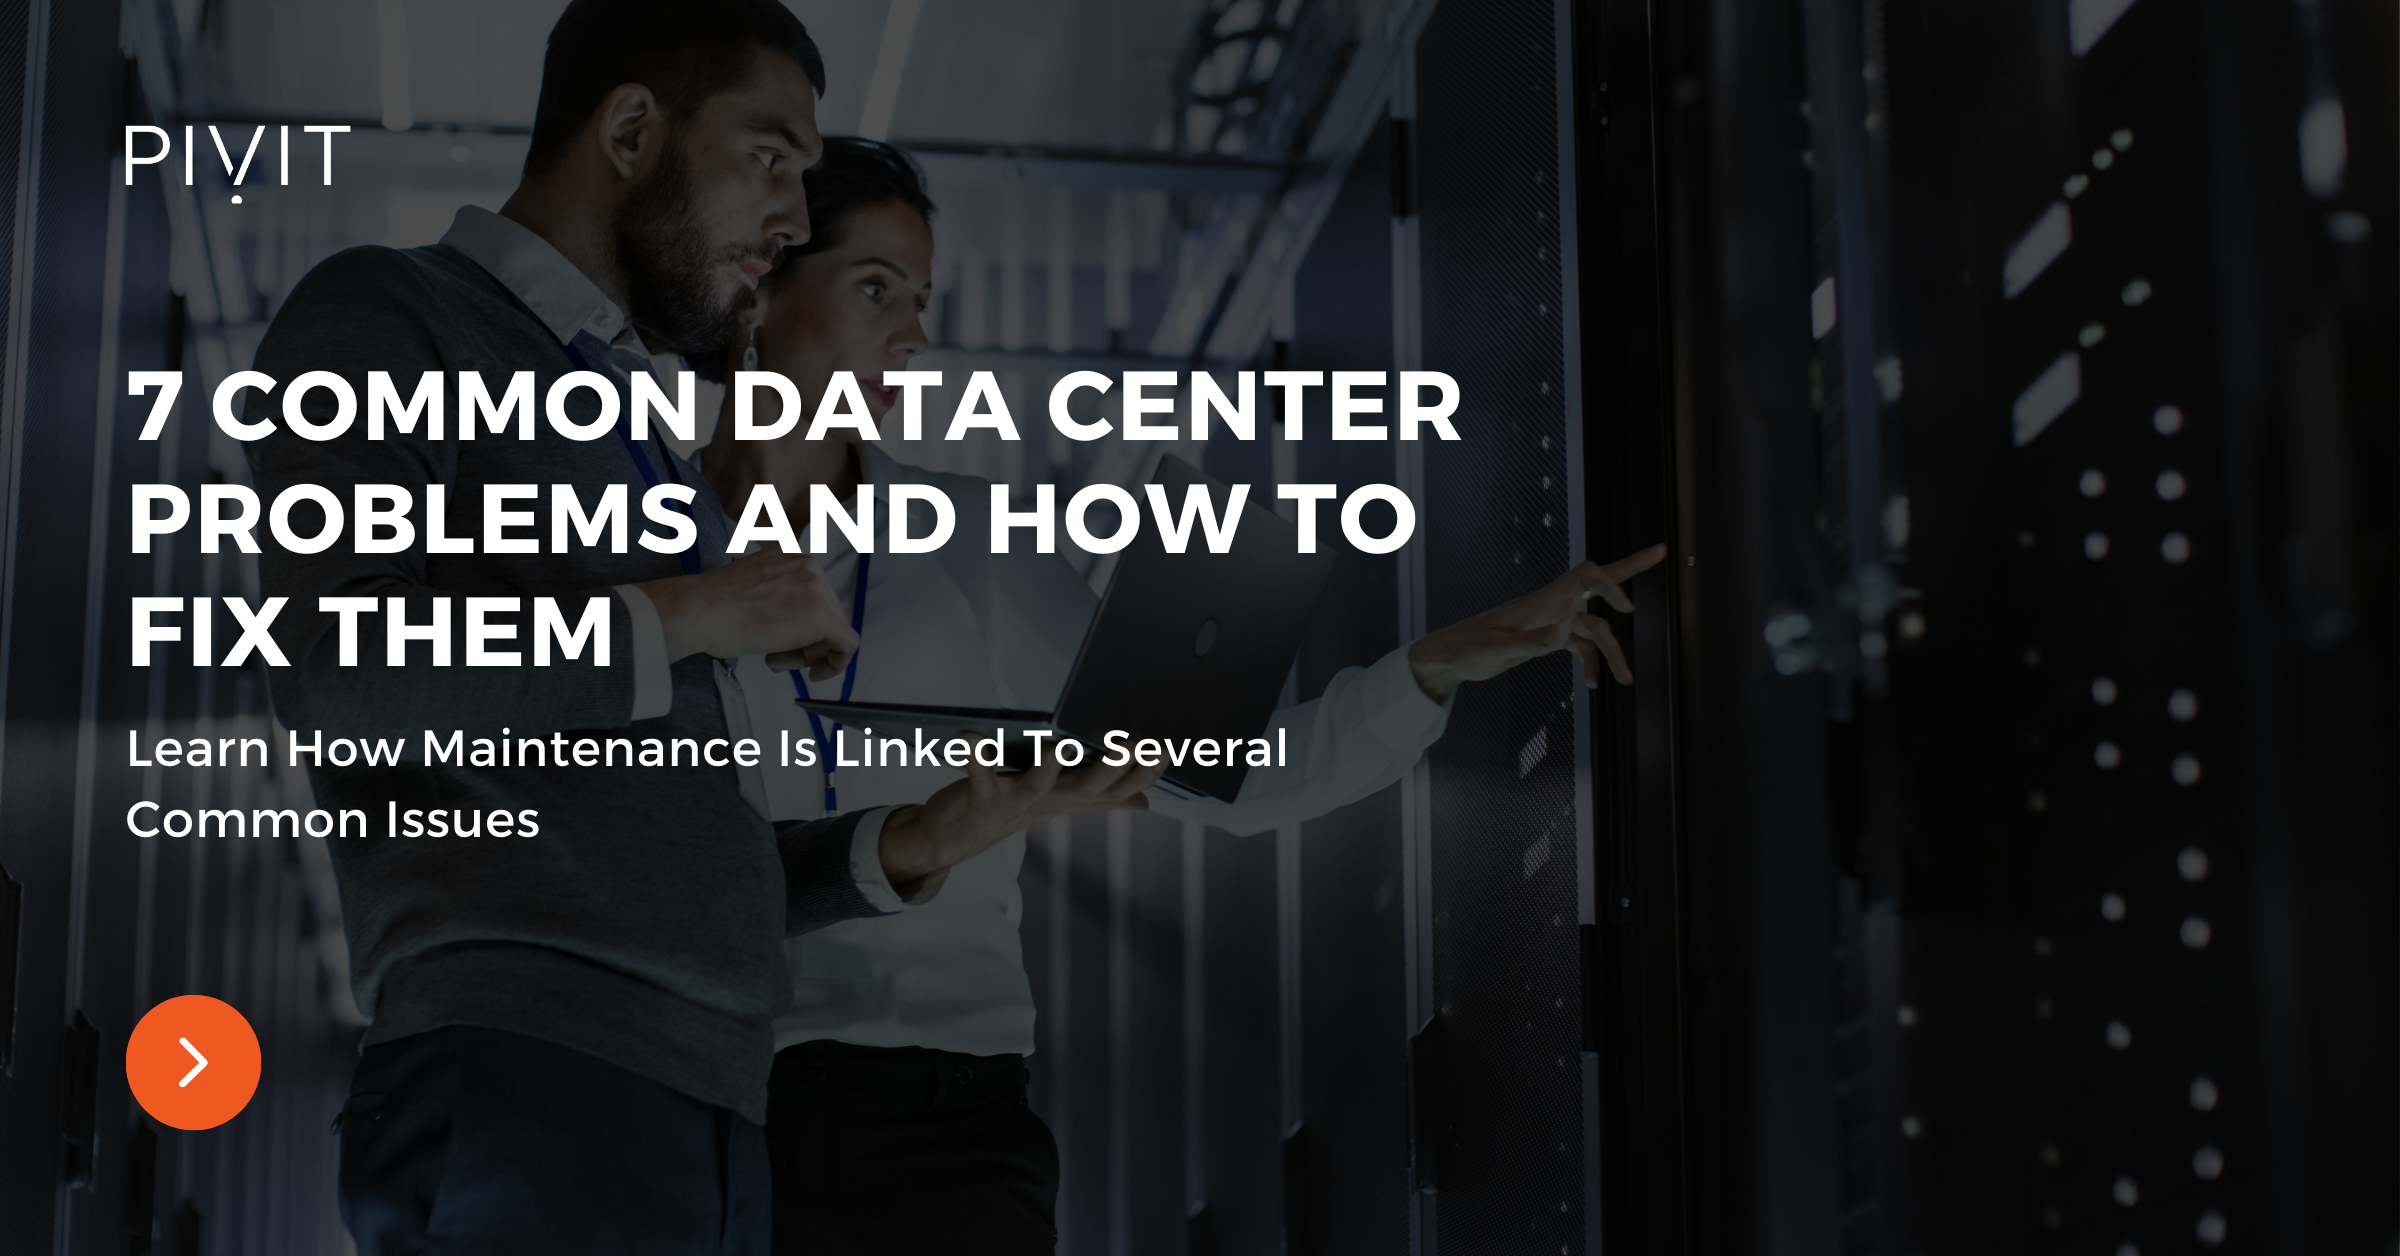 7 Common Data Center Problems And How To Fix Them - Learn How Maintenance Is Linked To Several Common Issue